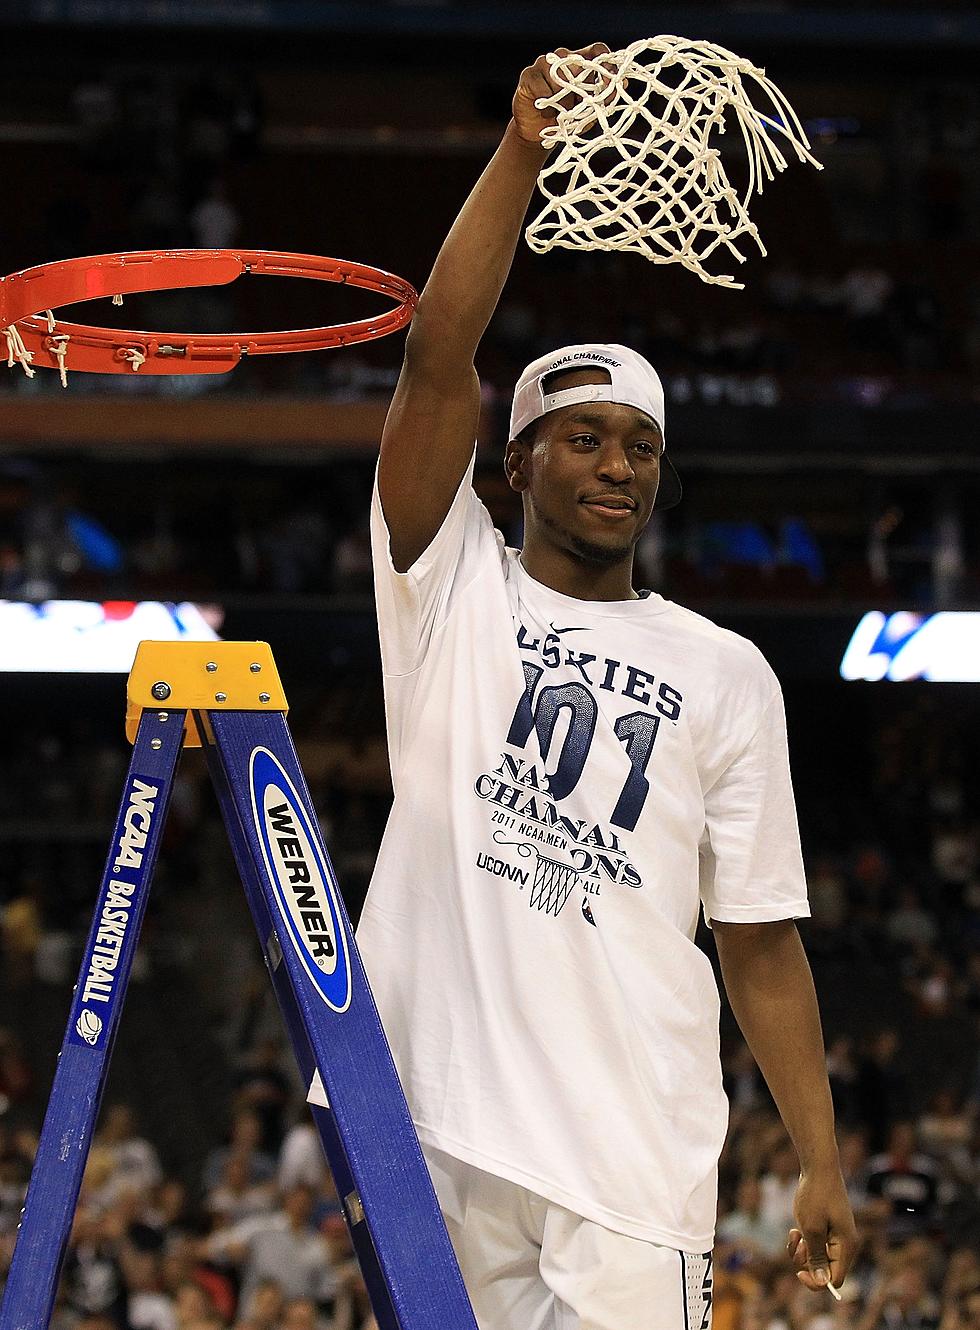 College Basketball Teams Cut Their Net After A Win~Why?